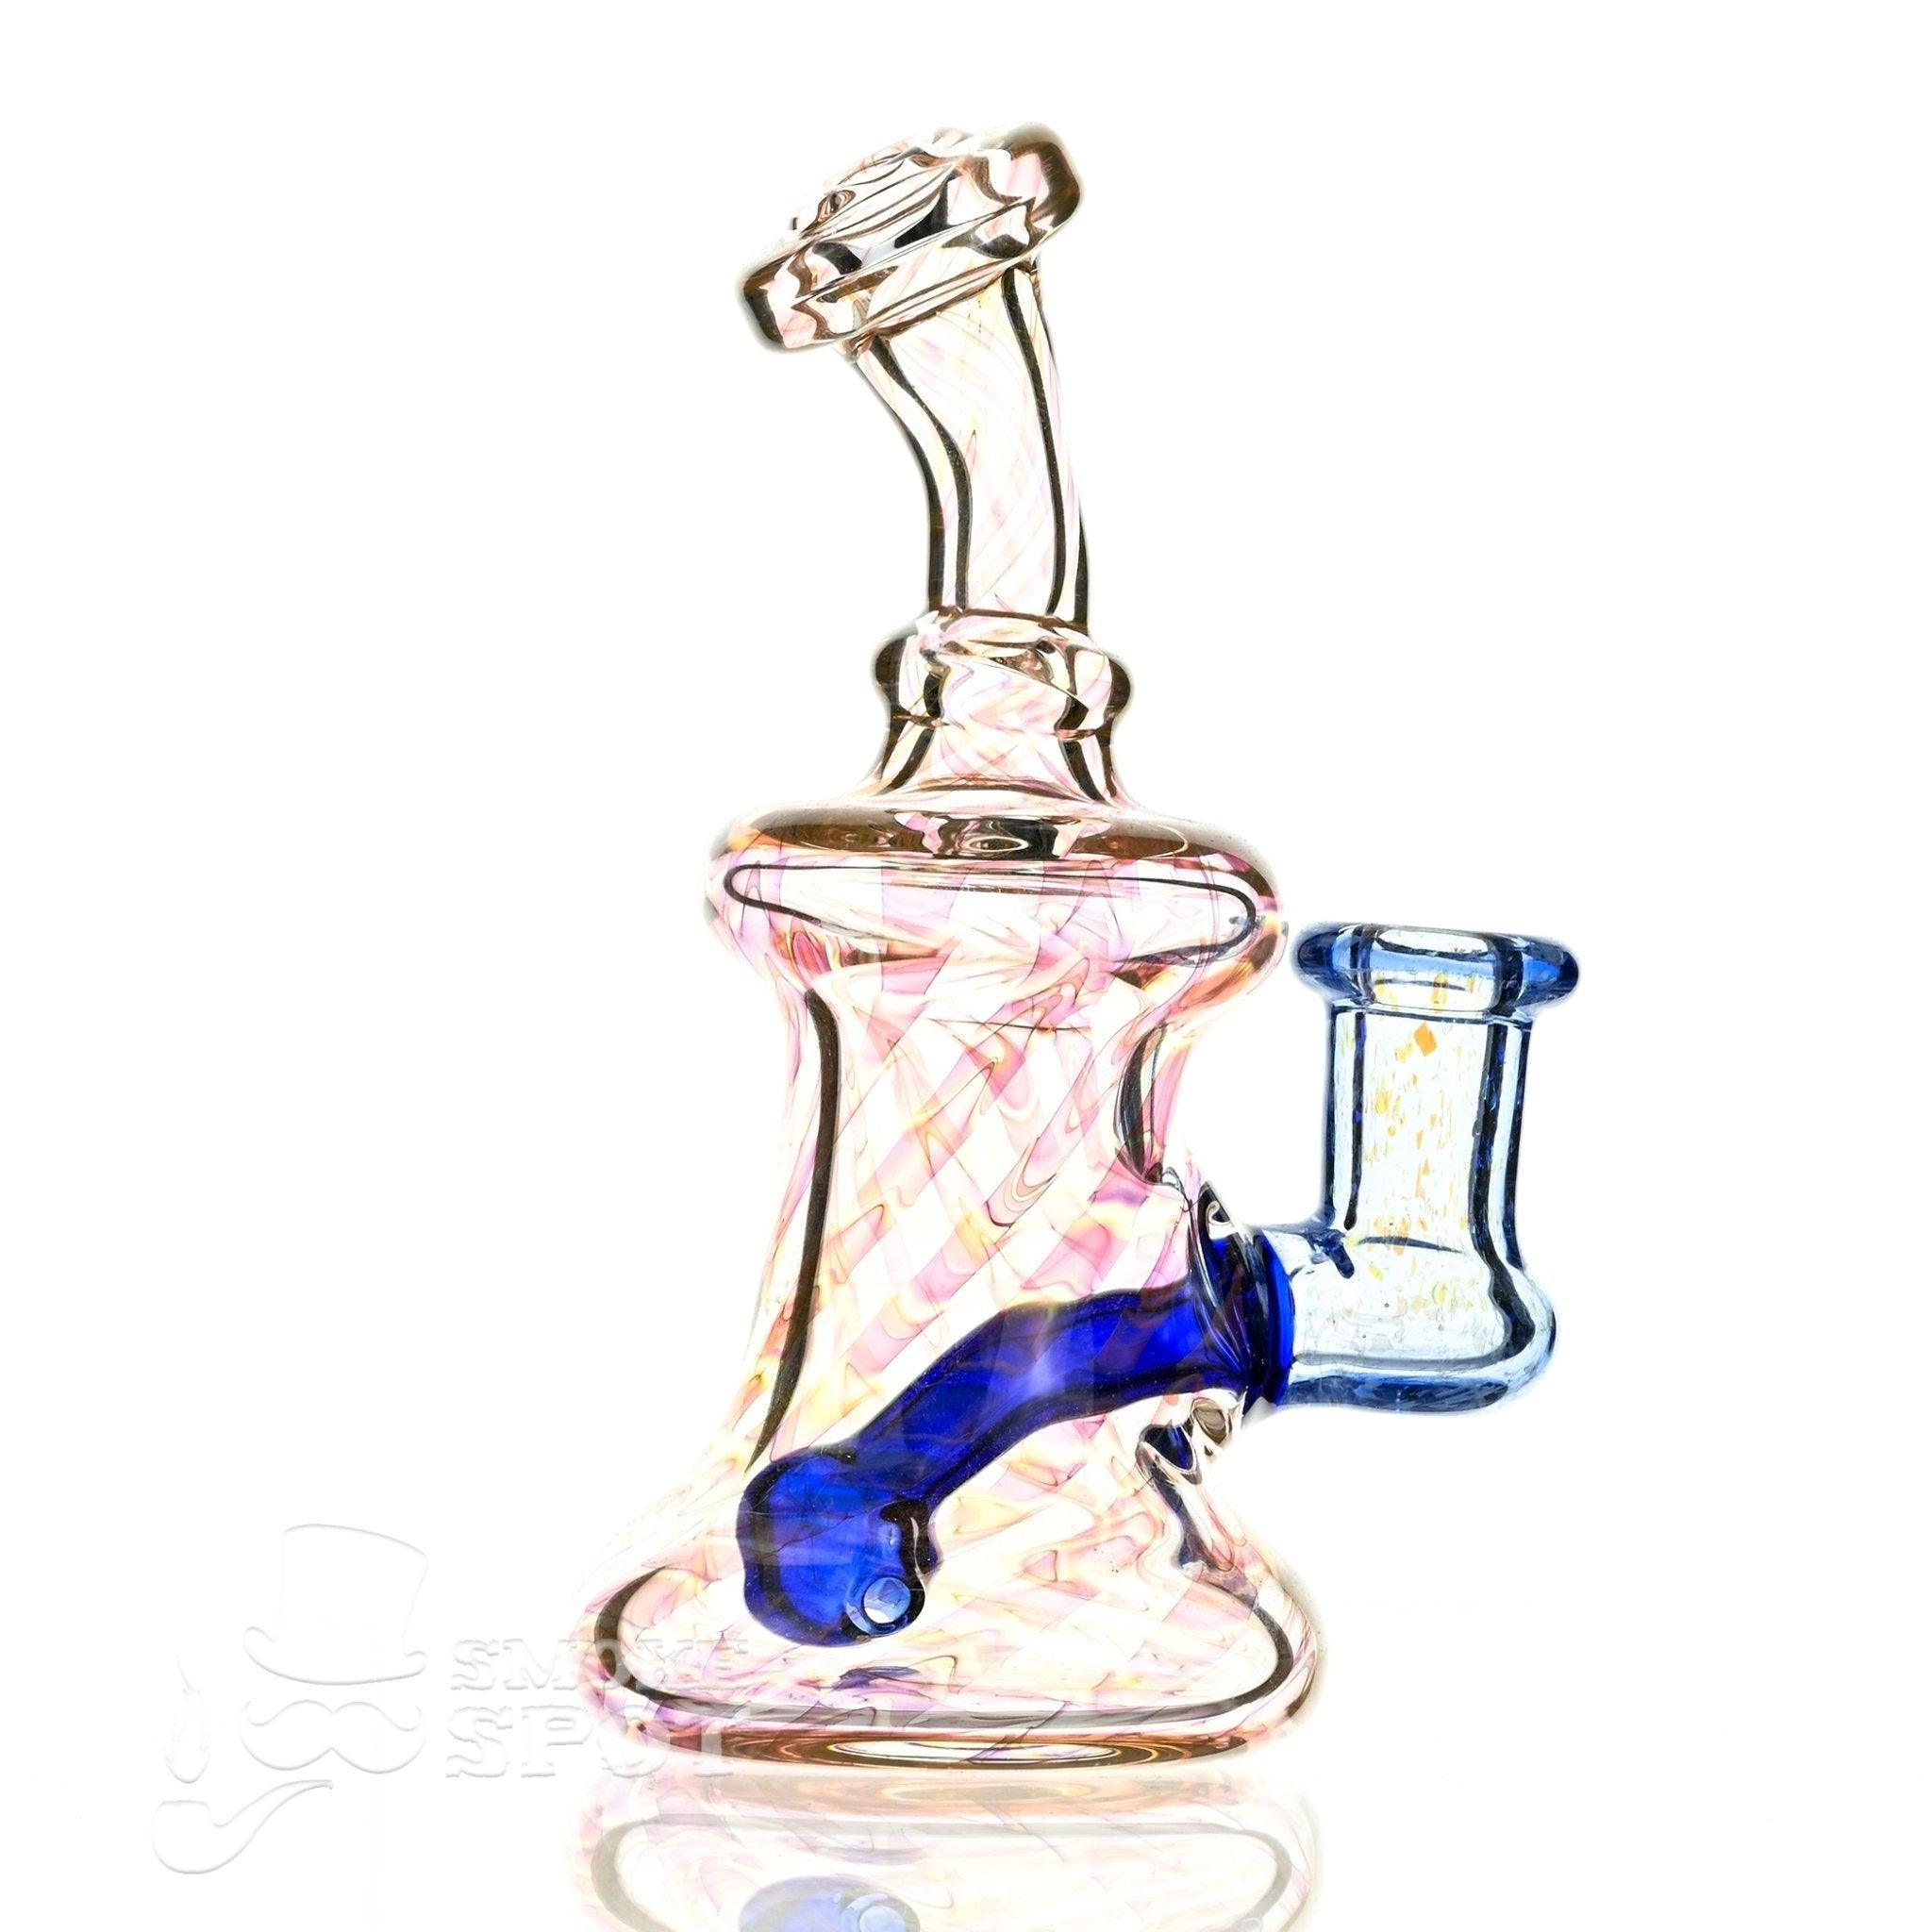 Smoky Mountain Glass Waterpipe 2 kind rig Gold Fumed & blue